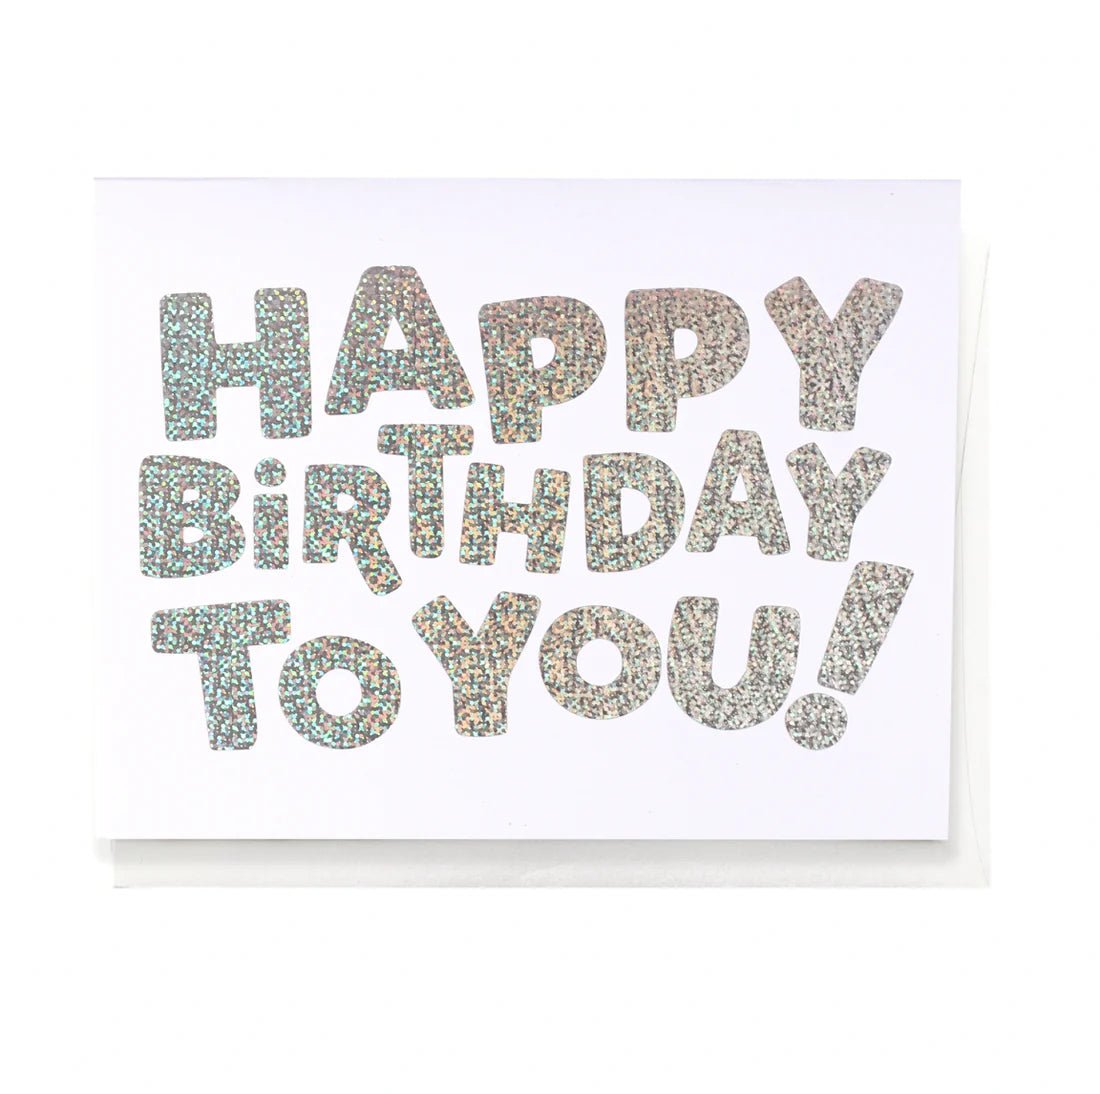 Happy Birthday To You!, Greeting Card - SO PRETTY CARA COTTER